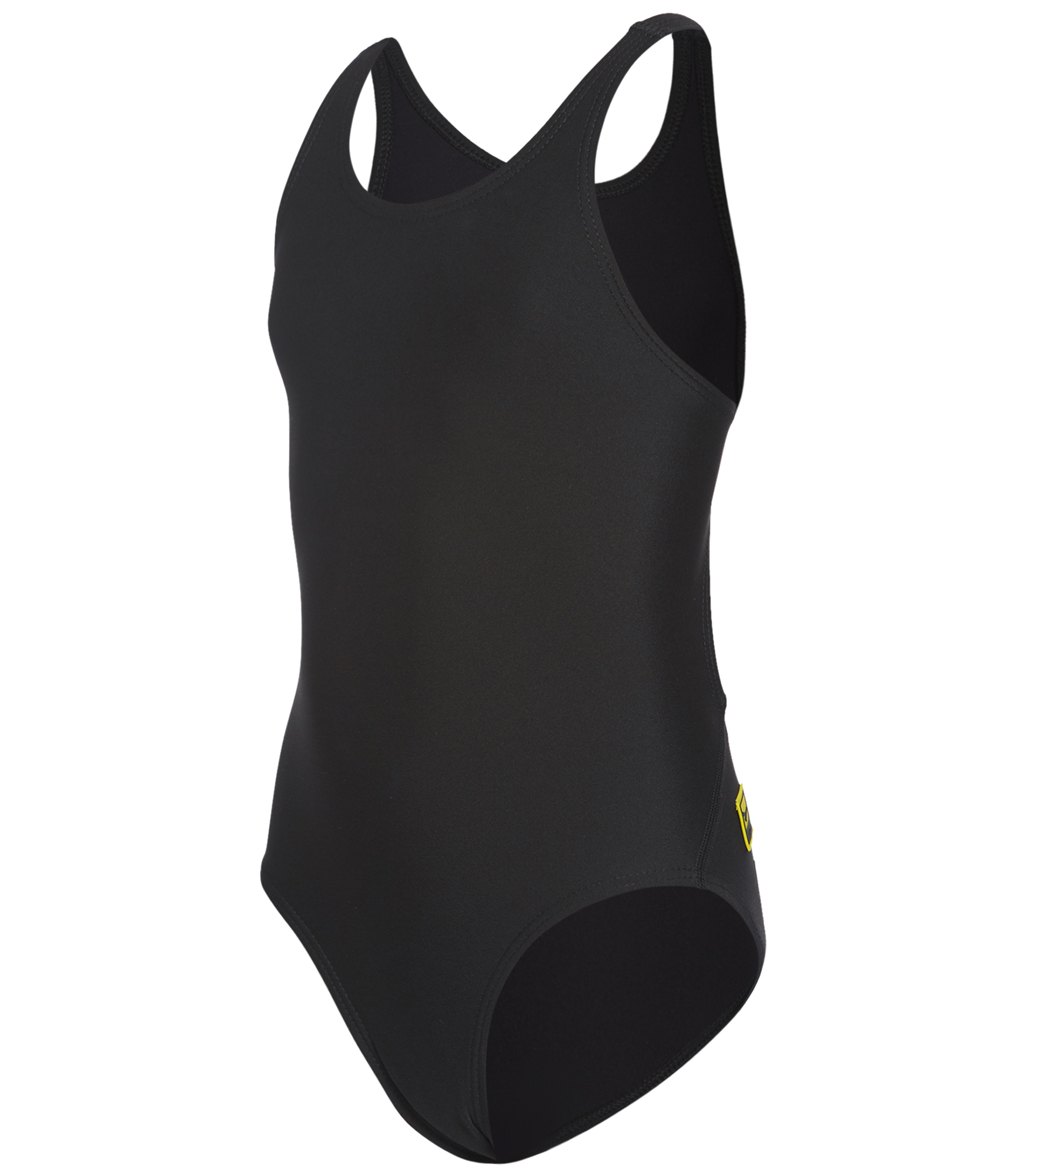 Finis Girls' Bladeback Solid One Piece Swimsuit - Black 22 - Swimoutlet.com